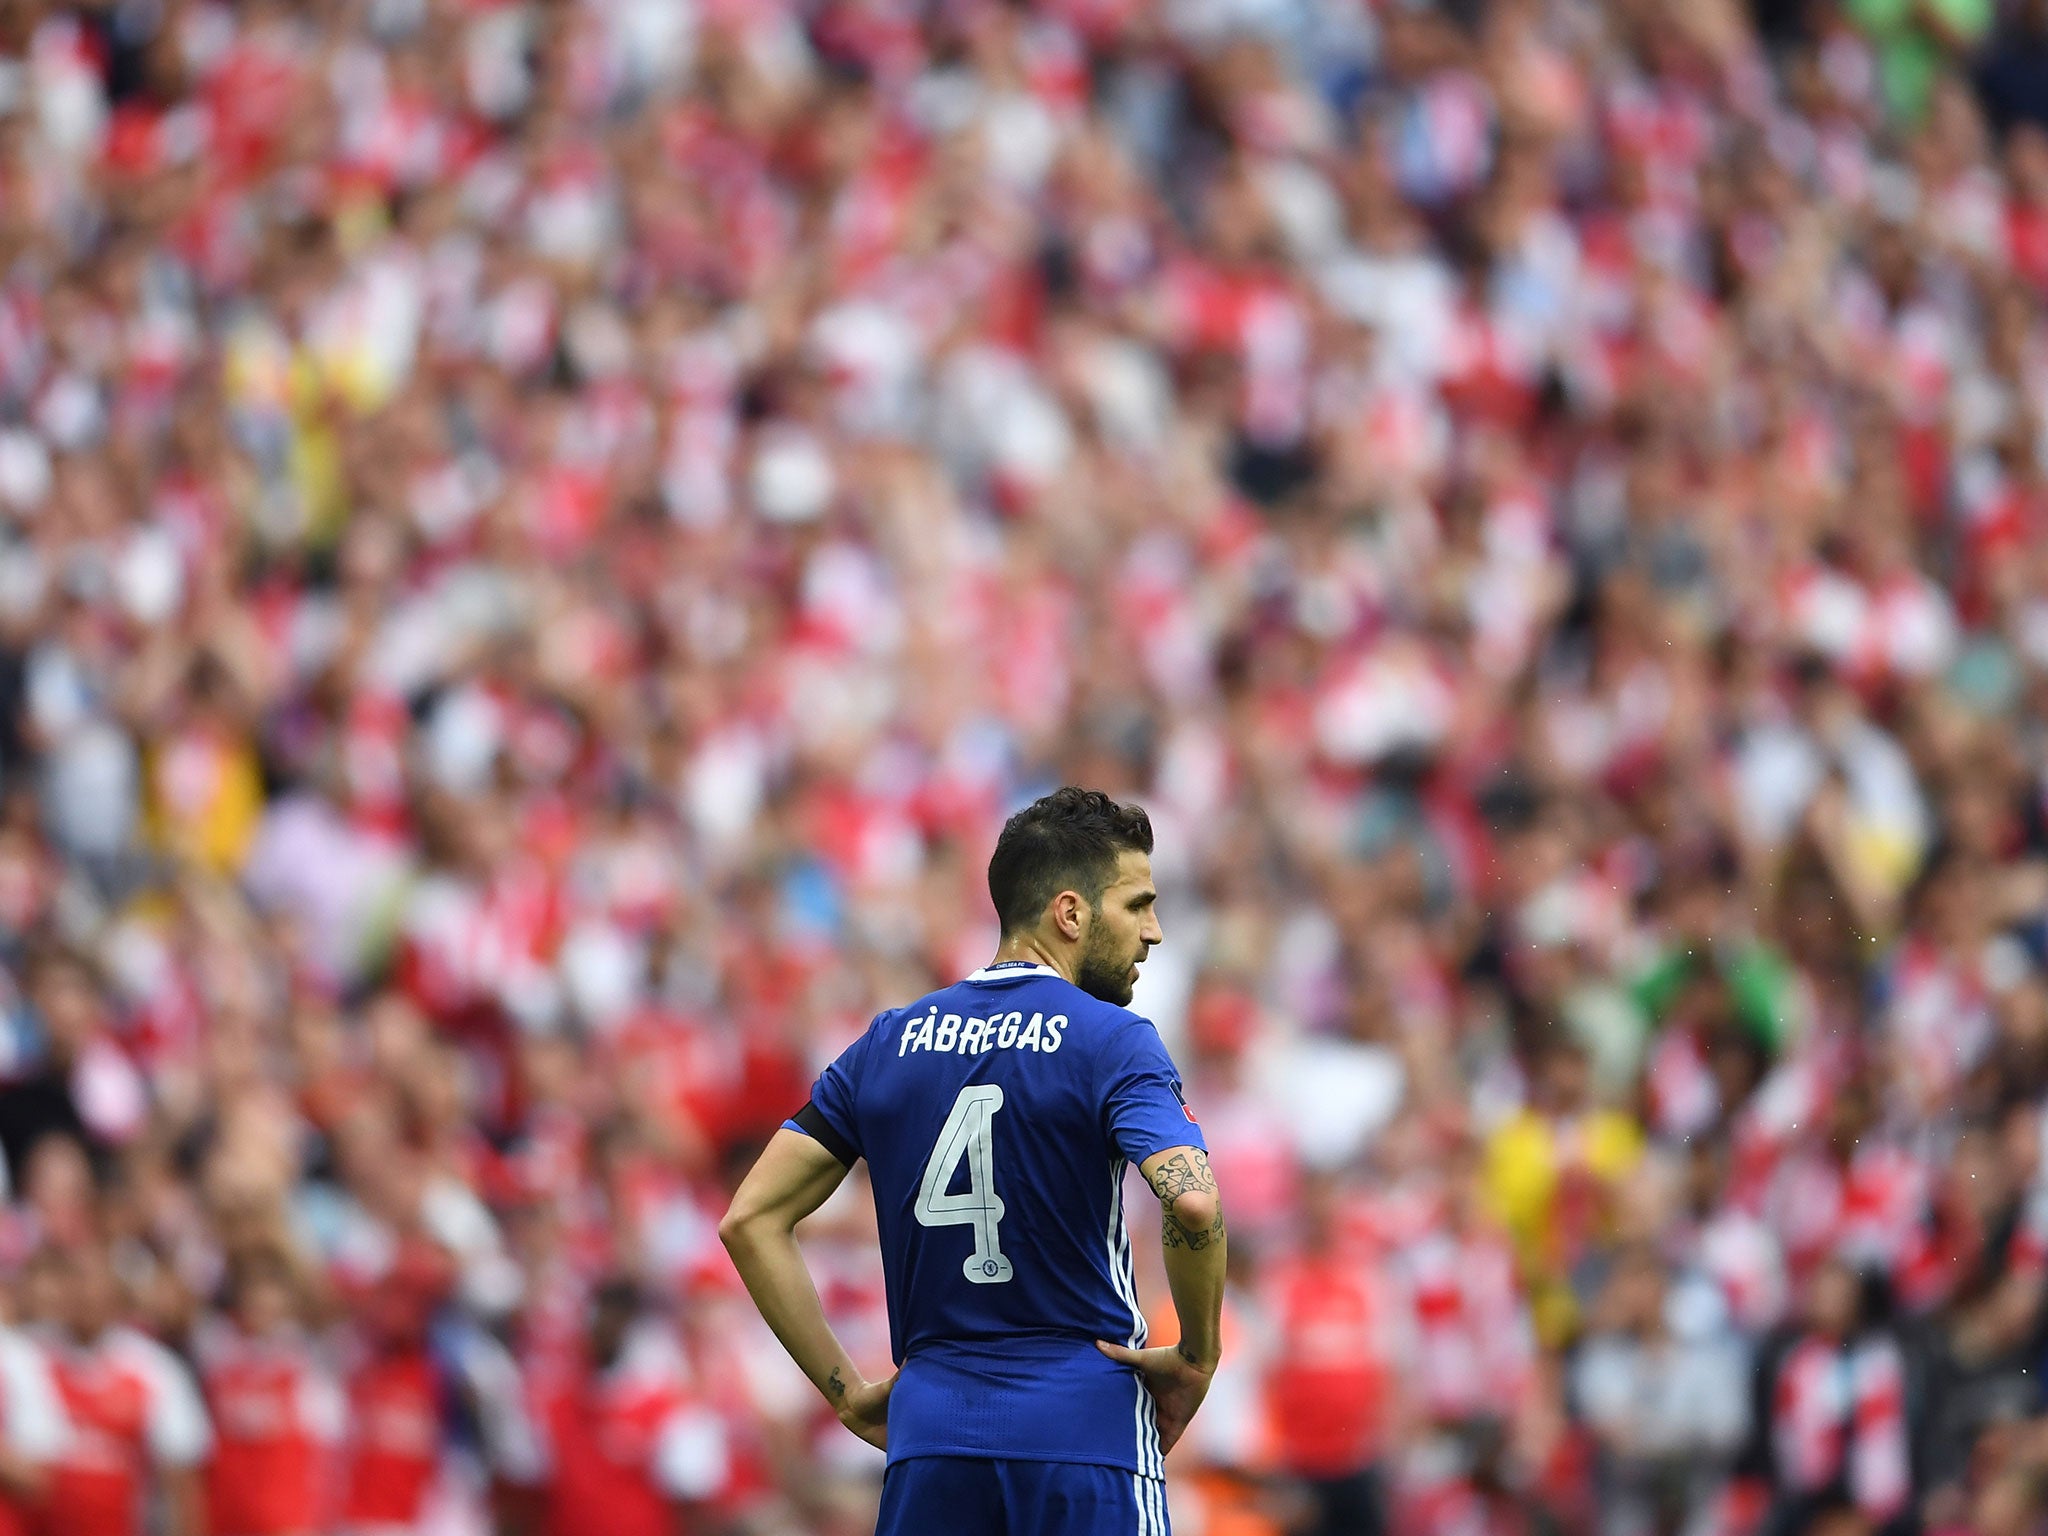 Cesc Fabregas was brought on later in the game